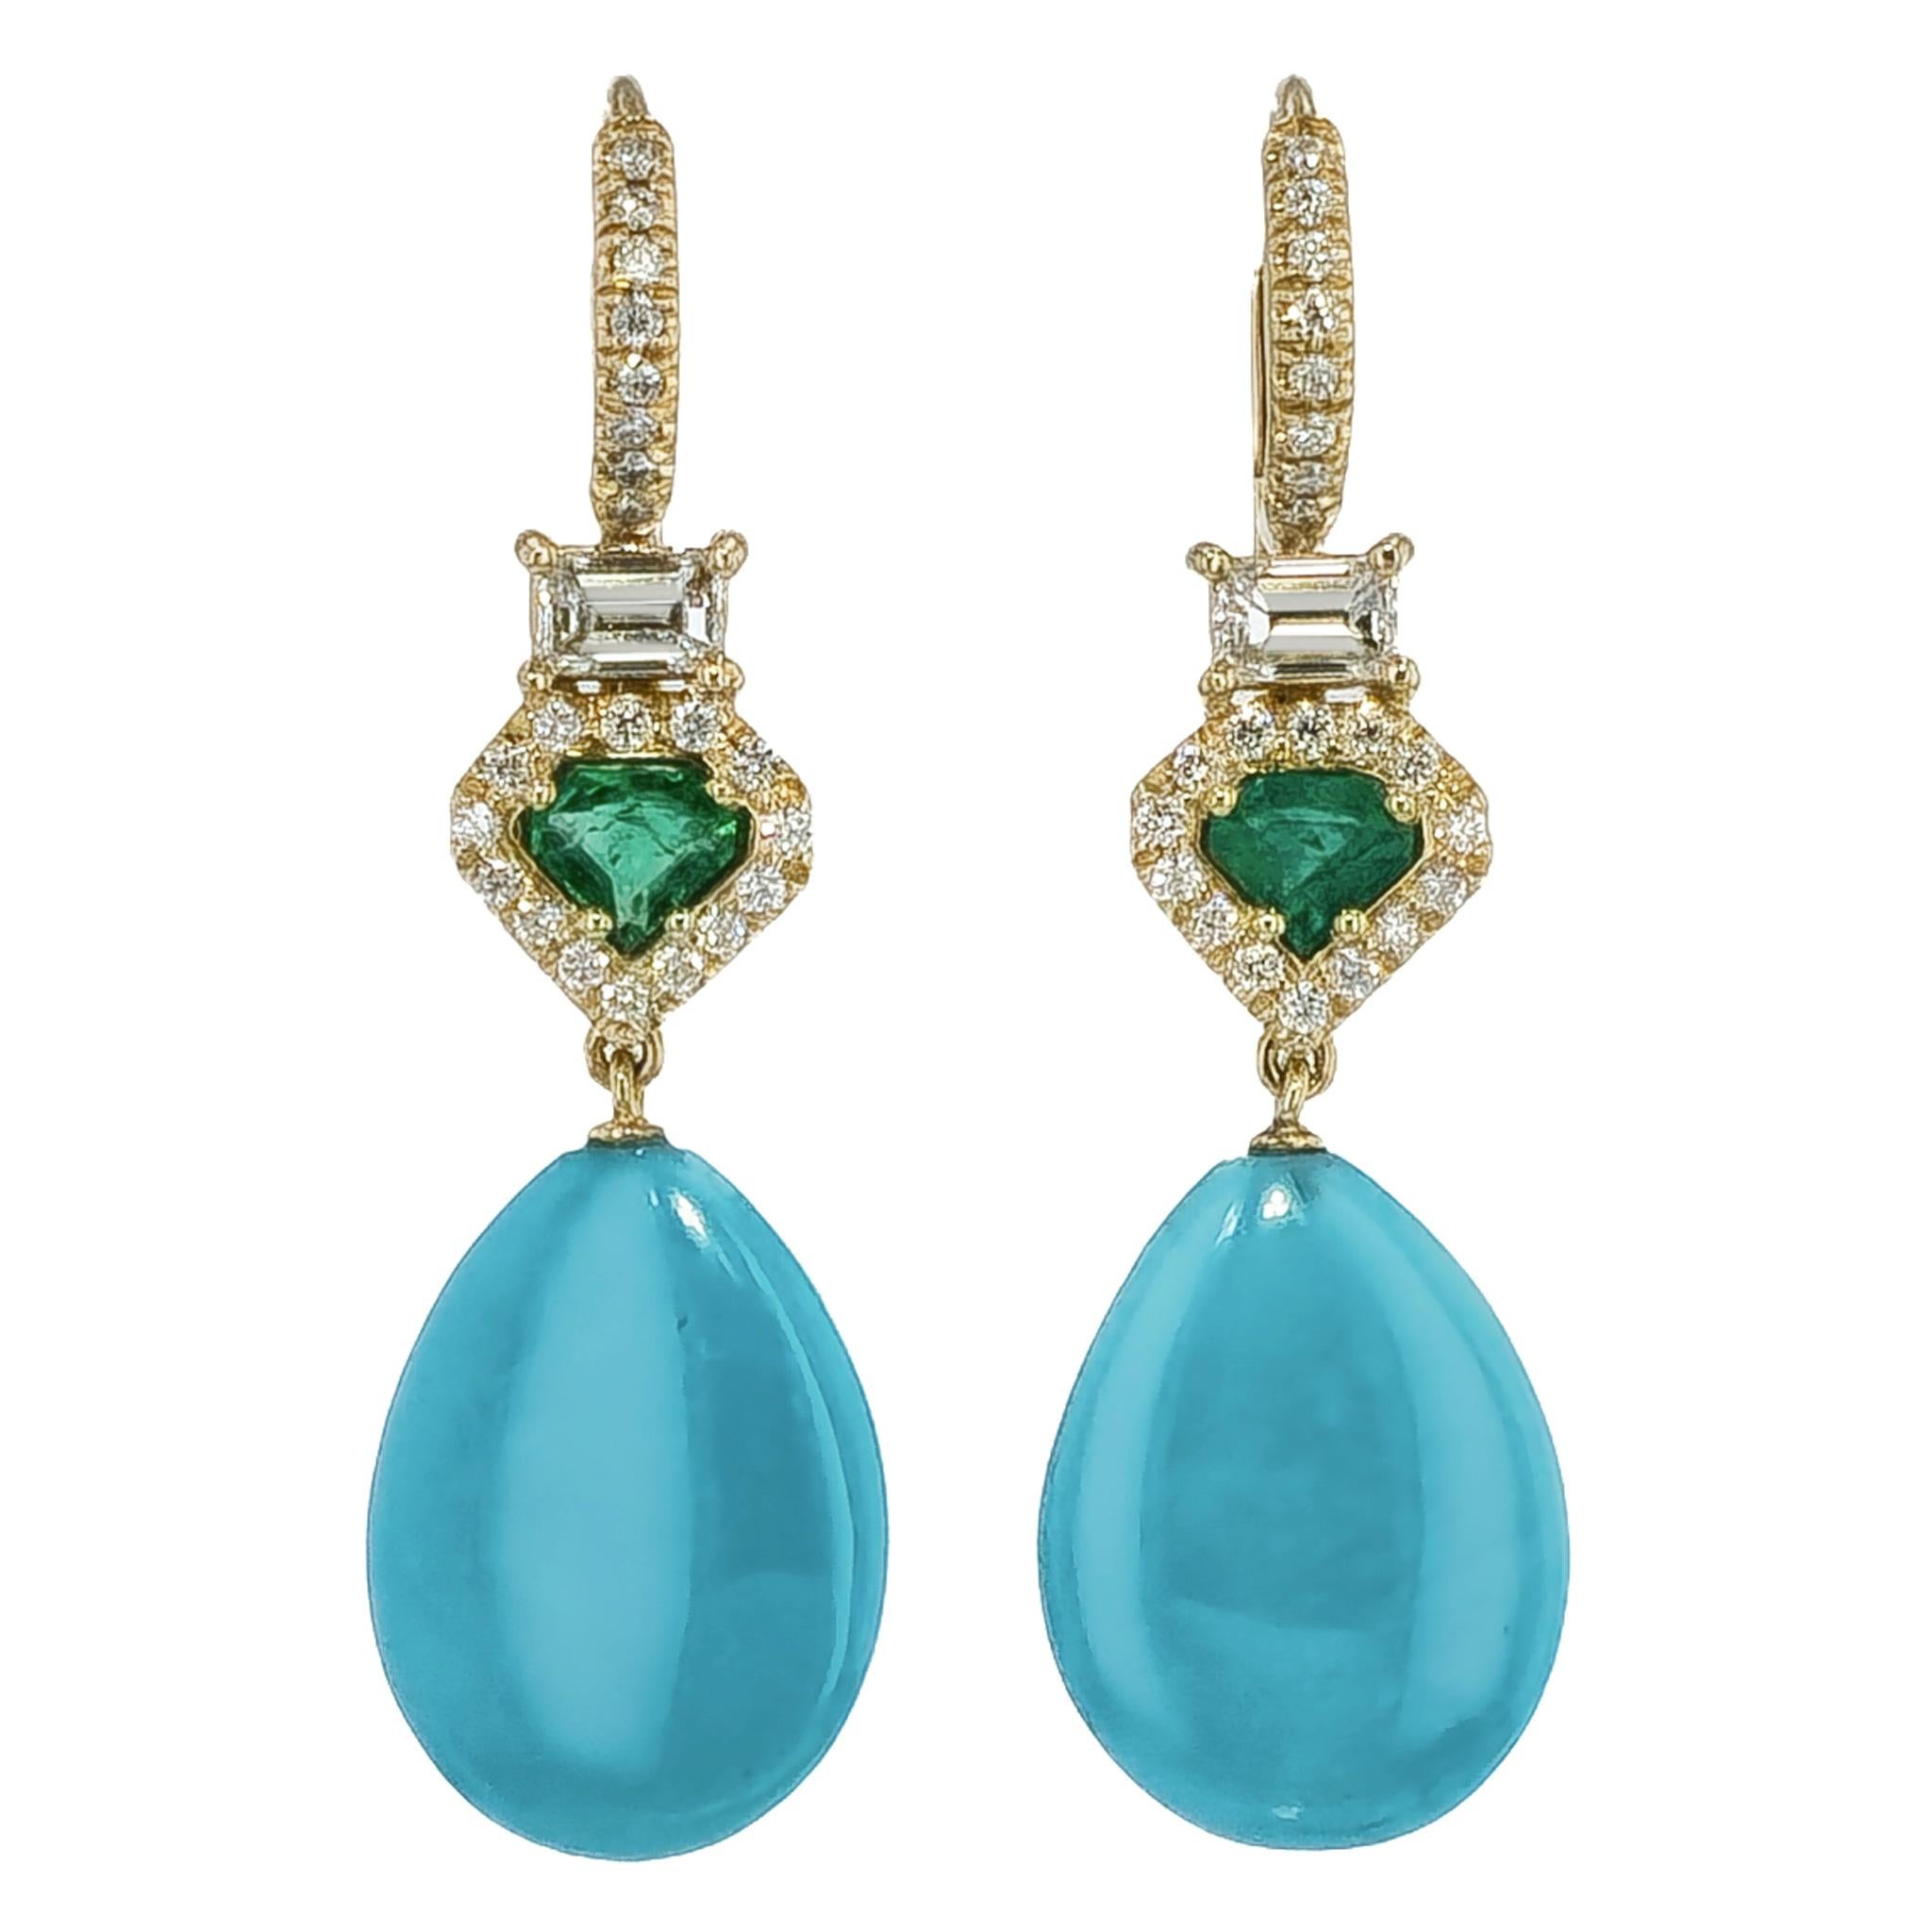 Gleaming with bright turquoise stones, these drop earrings sparkle with 2 emerald cut diamonds, 44 more pave set diamonds and two kite shaped emeralds complete the look. Crafted with 18 karat yellow gold, these handmade H&H Collection earrings are a